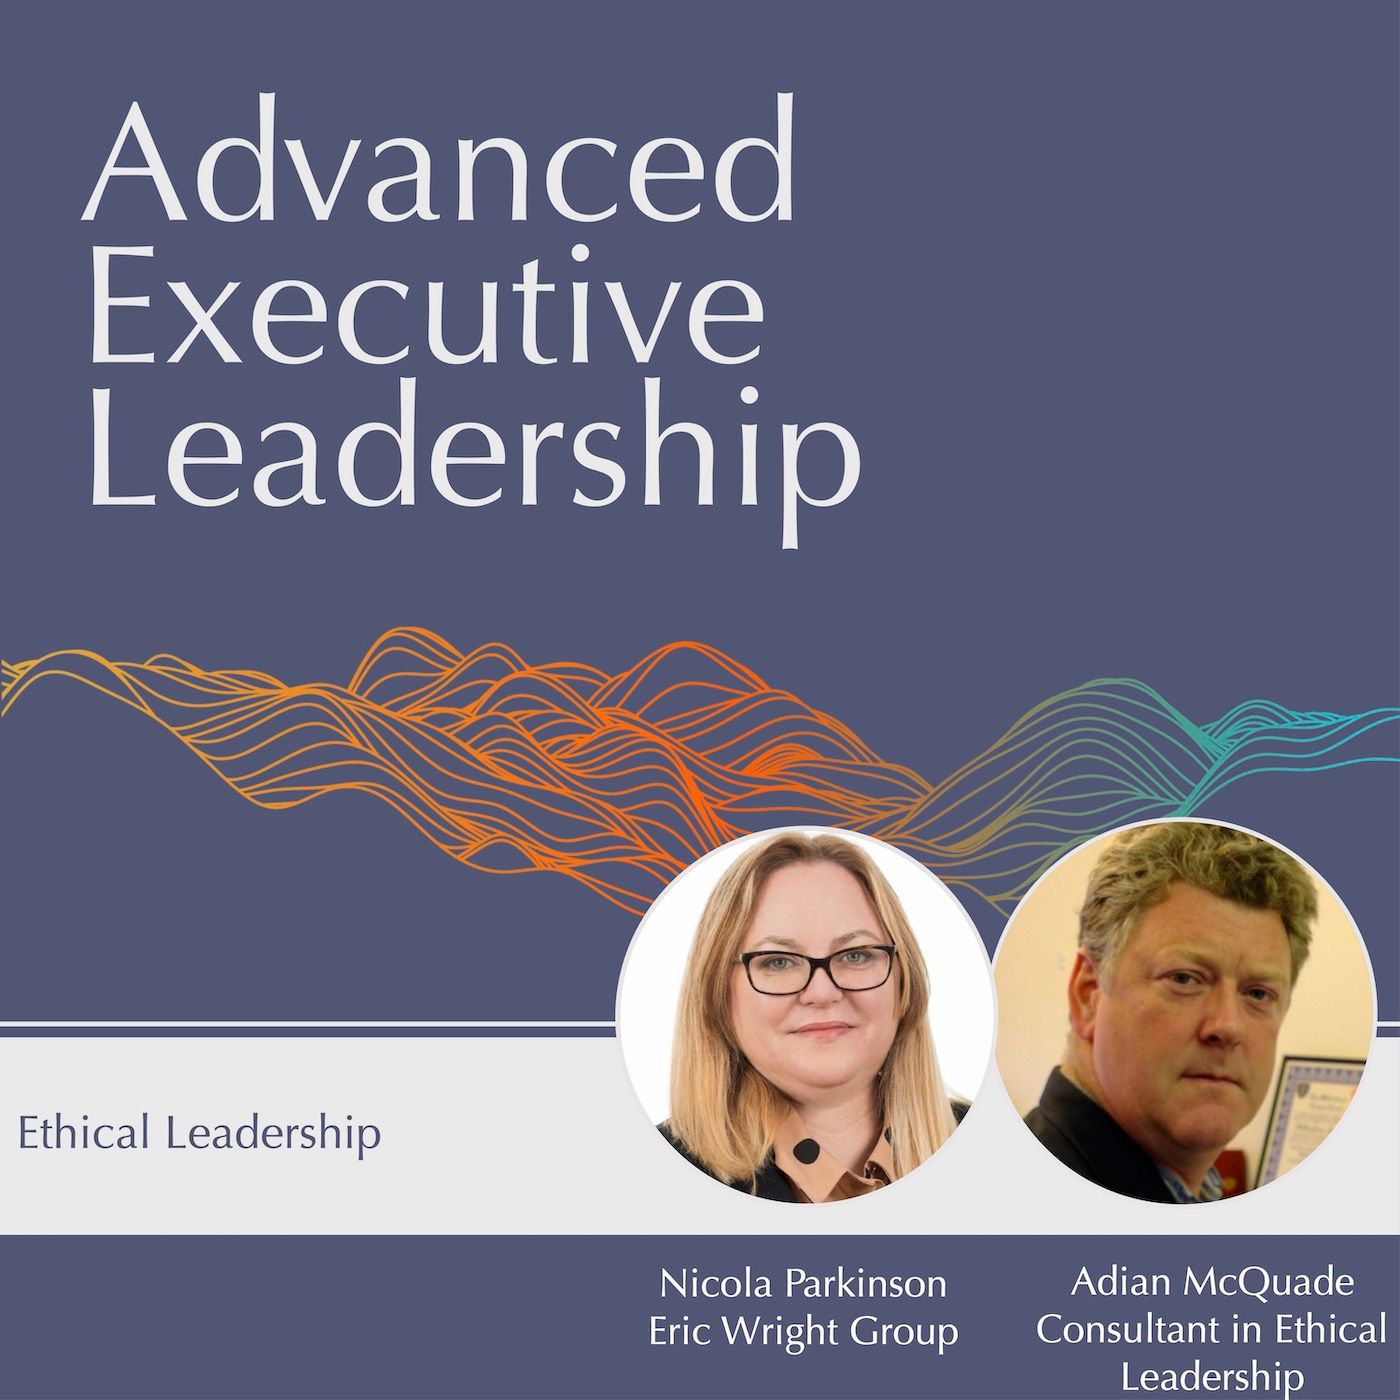 #43 Ethical Leadership and social value with Aidan McQuade and Nicola Parkinson